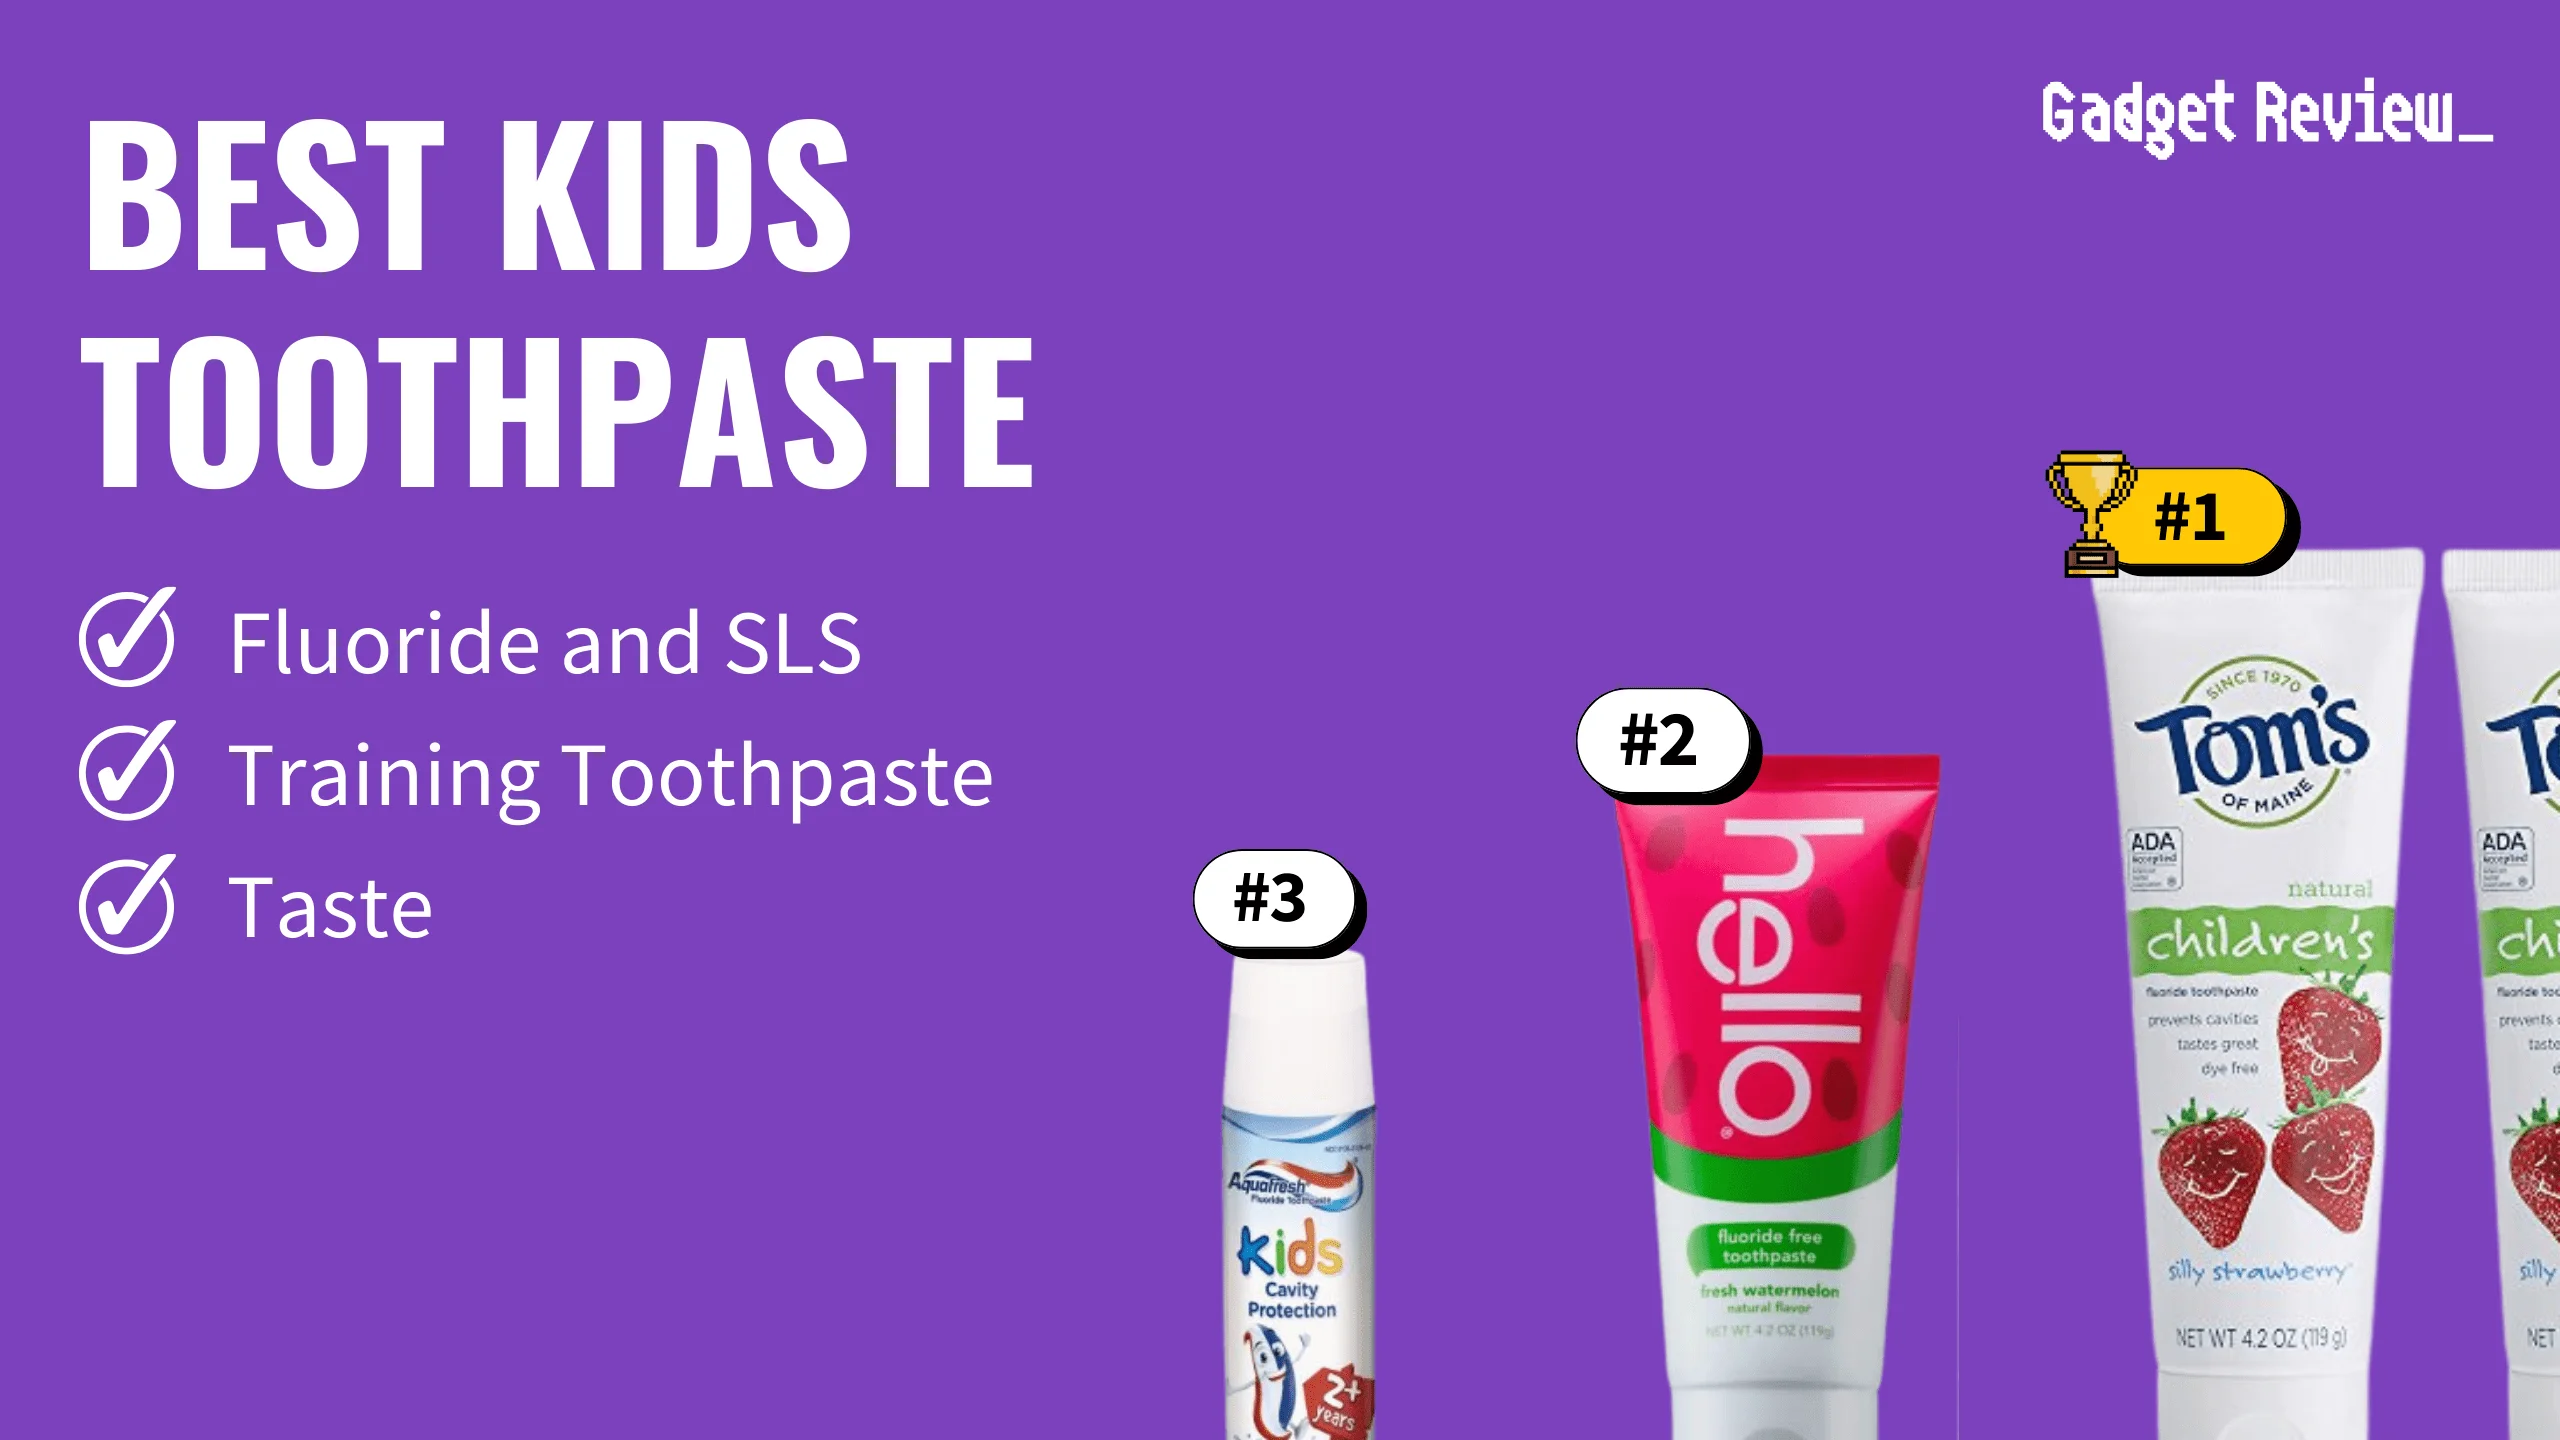 best kids toothpaste featured image that shows the top three best electric toothbrush models